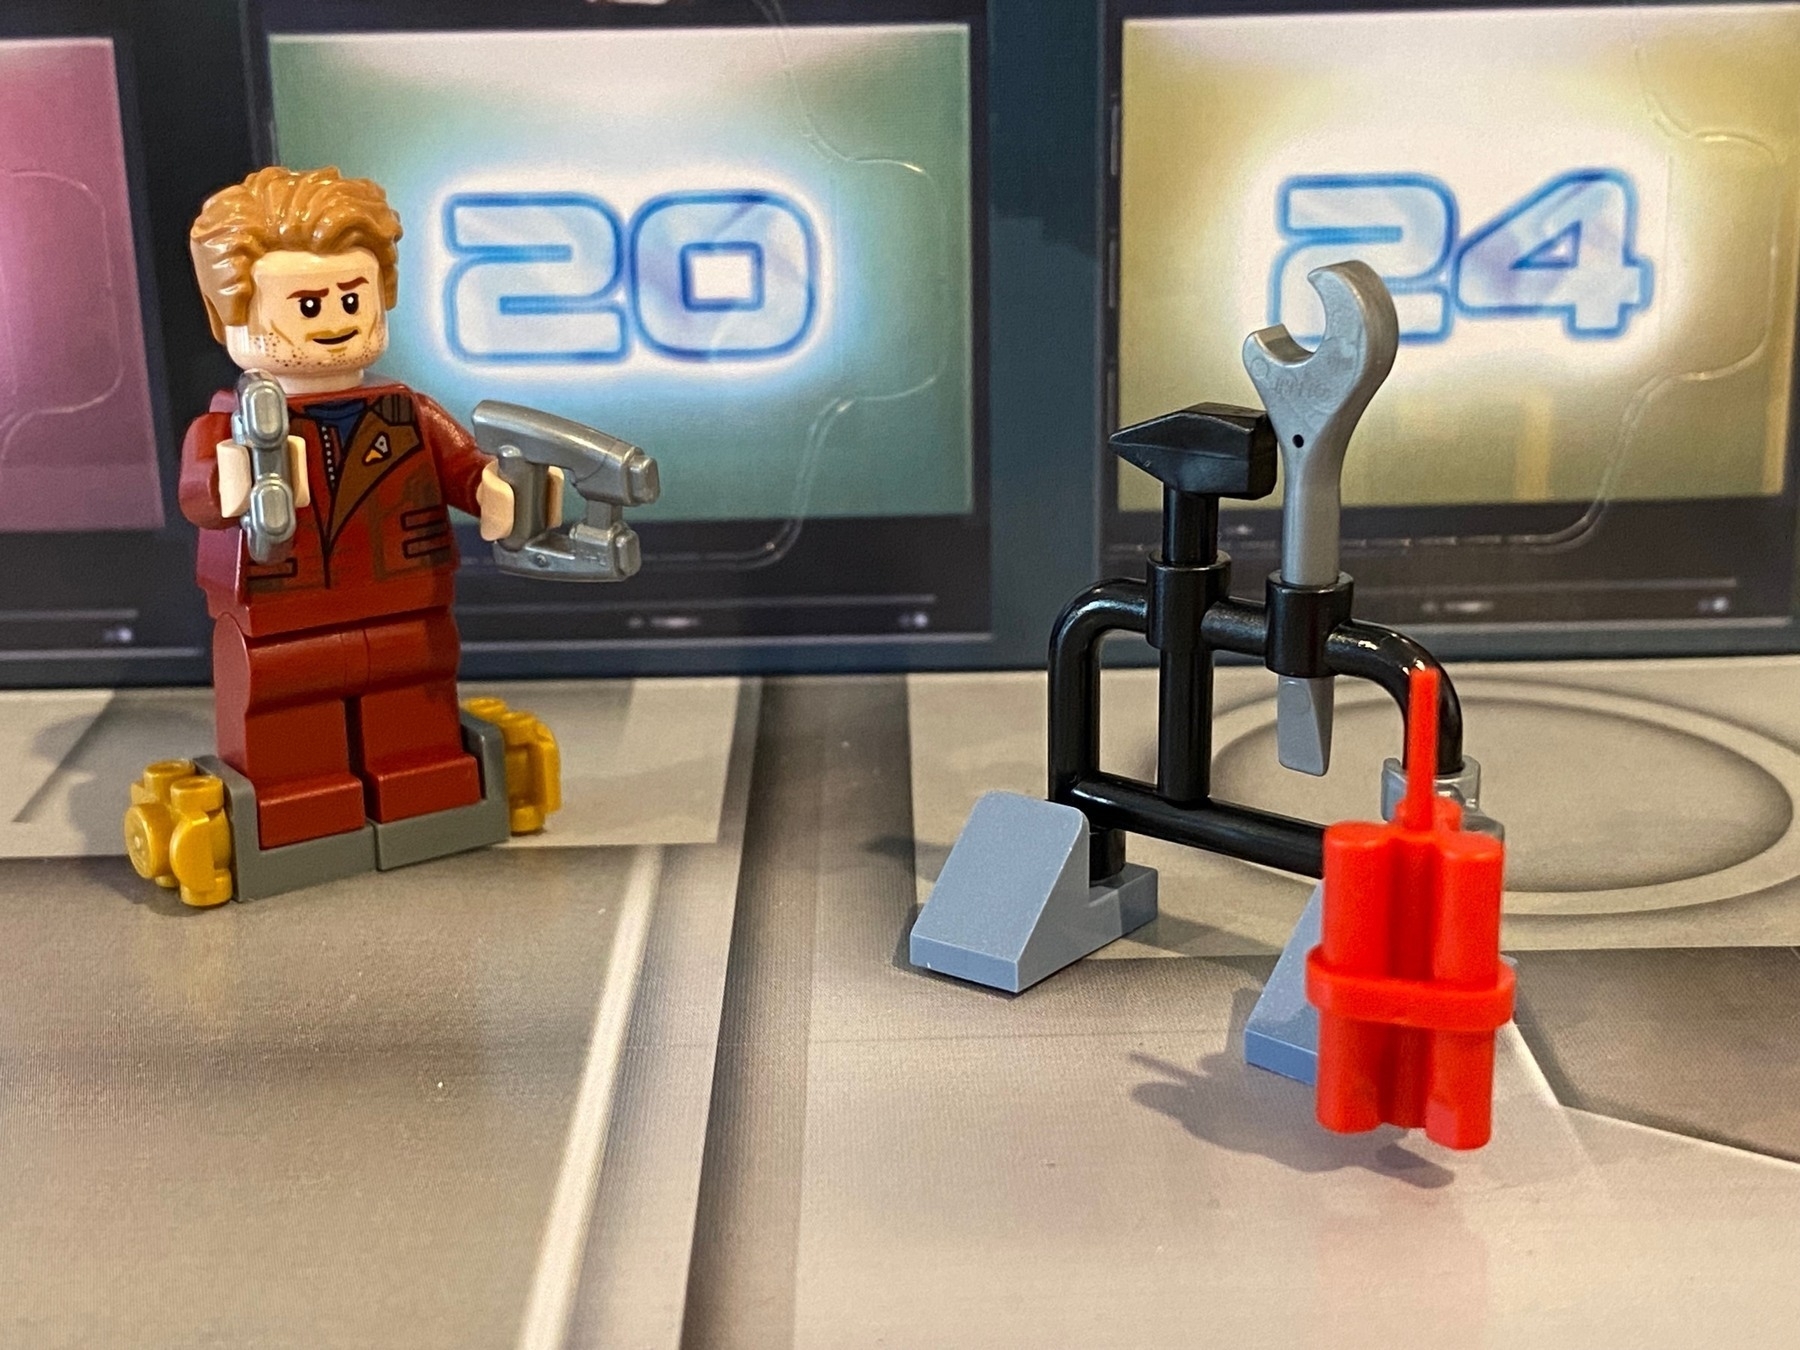 small tool rack from the Guardians of the Galaxy Lego advent calendar, with Star Lord mini gig behind